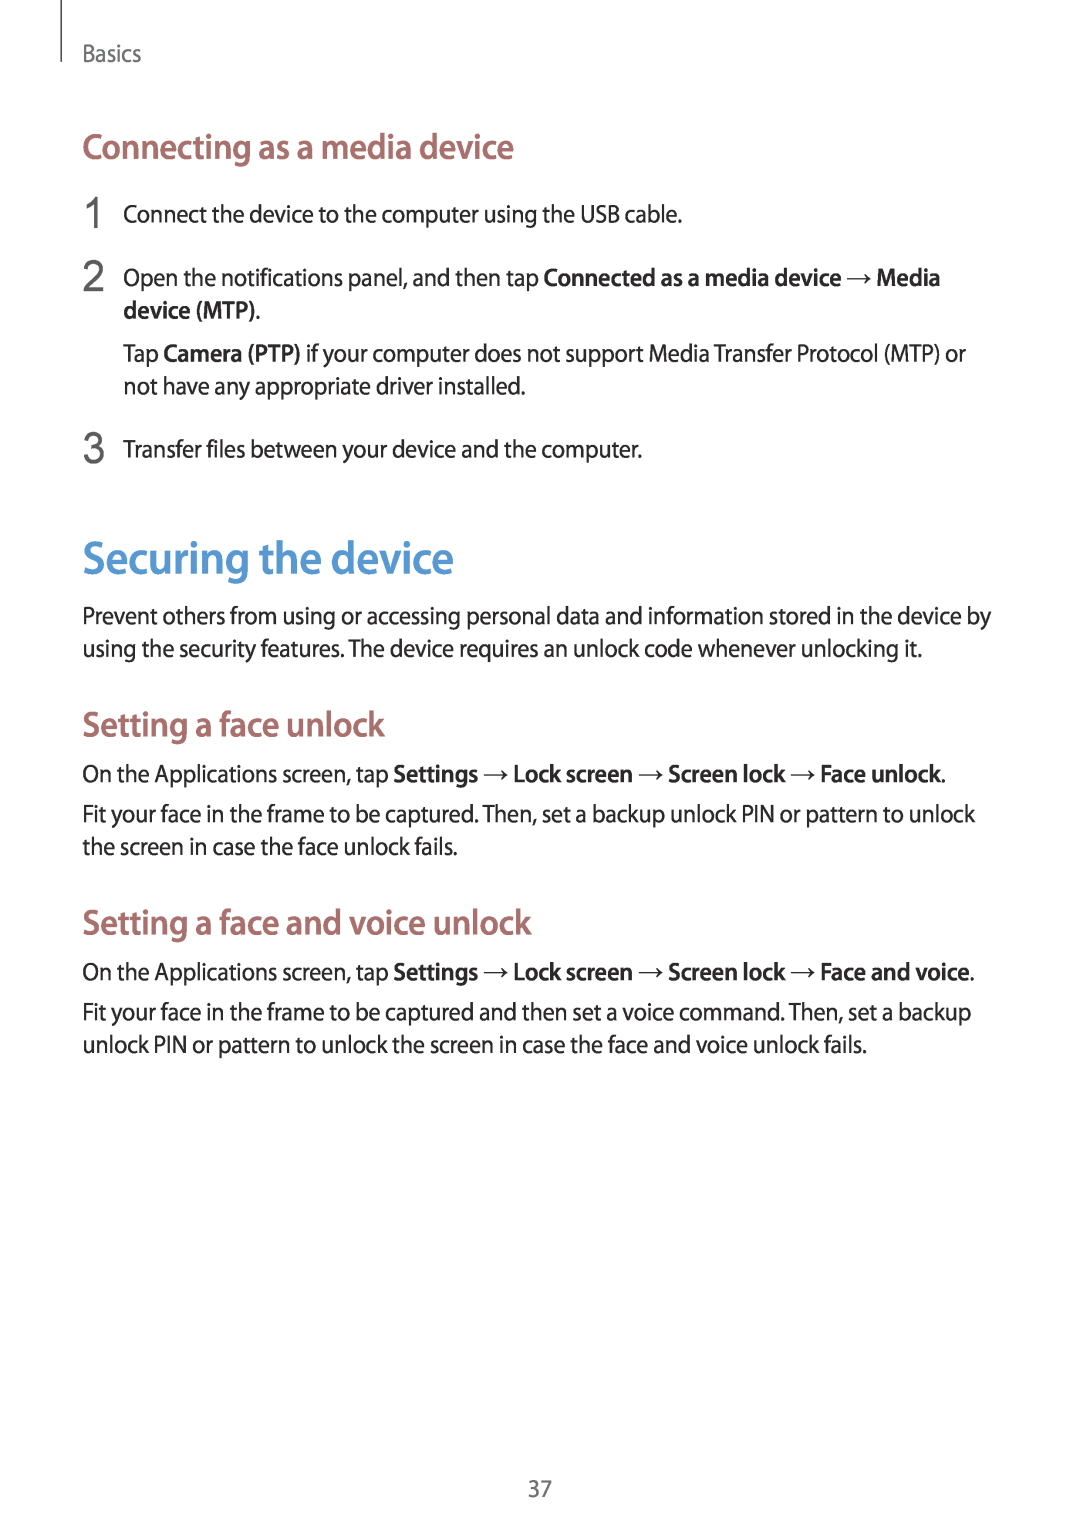 Samsung GT-S7710TAAMOB manual Securing the device, Connecting as a media device, Setting a face unlock, device MTP, Basics 